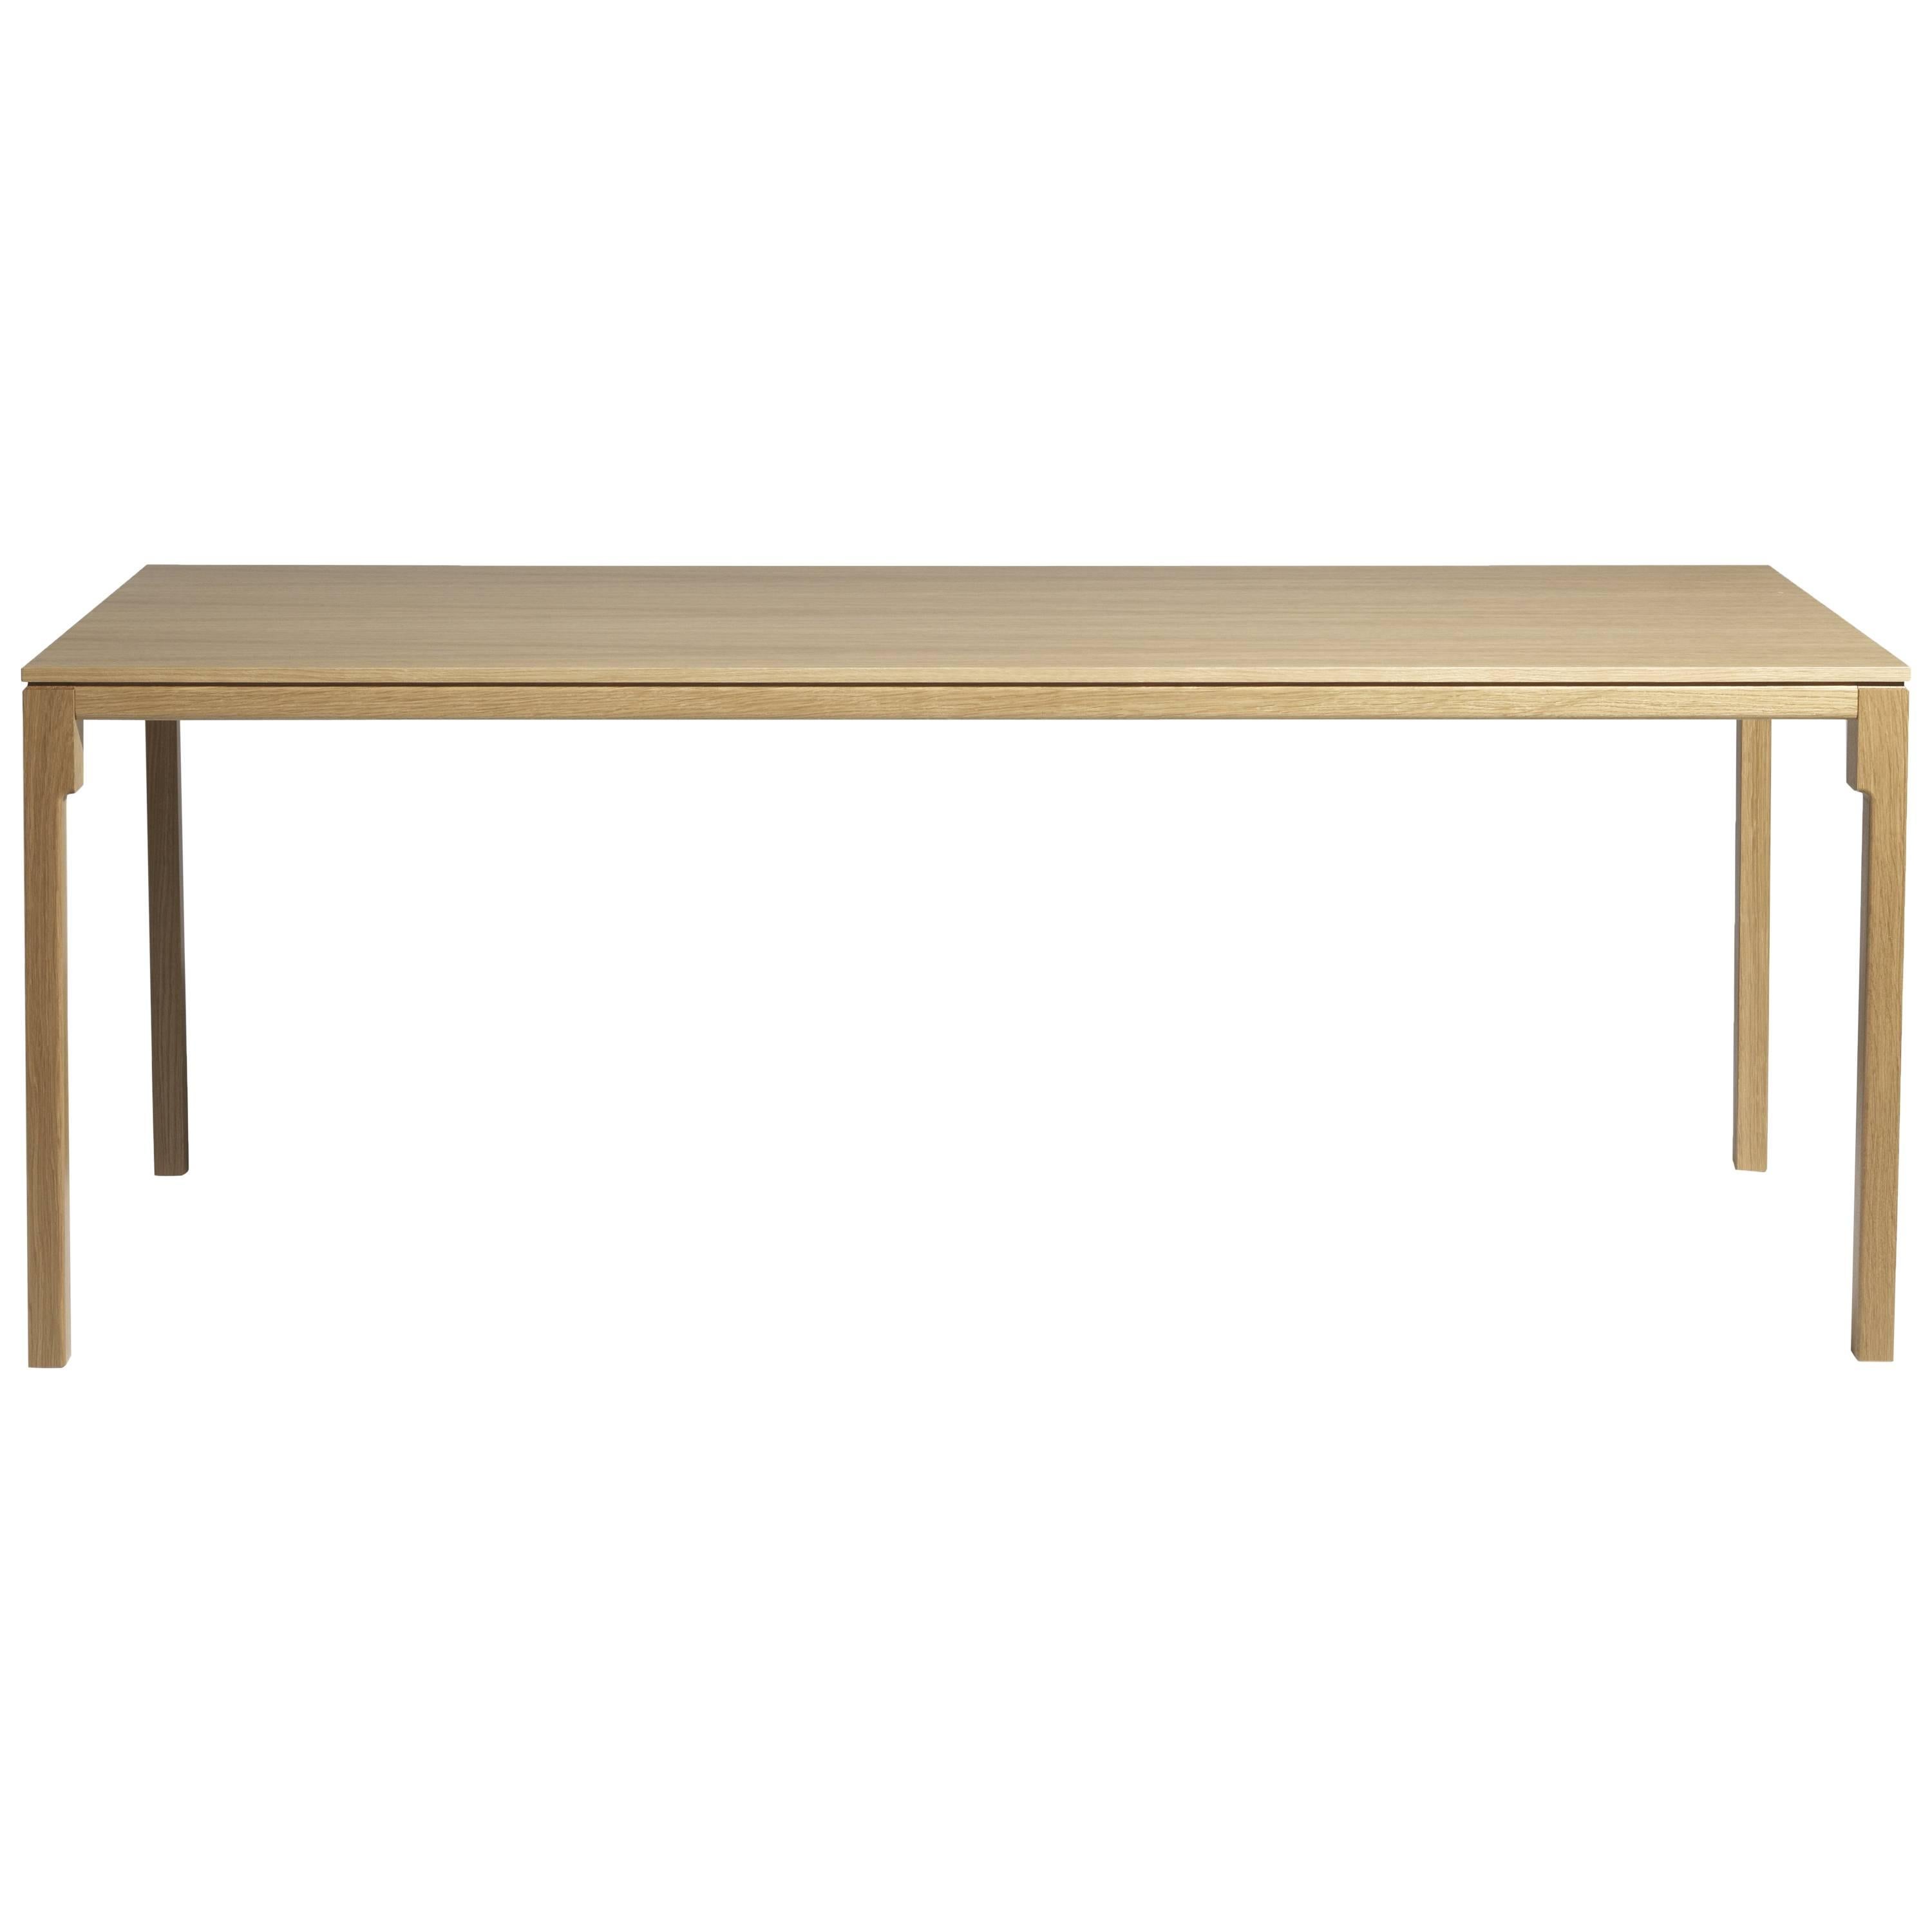 "Mingx Wooden" Table in Solid Oak Designed by Konstantin Grcic for Driade